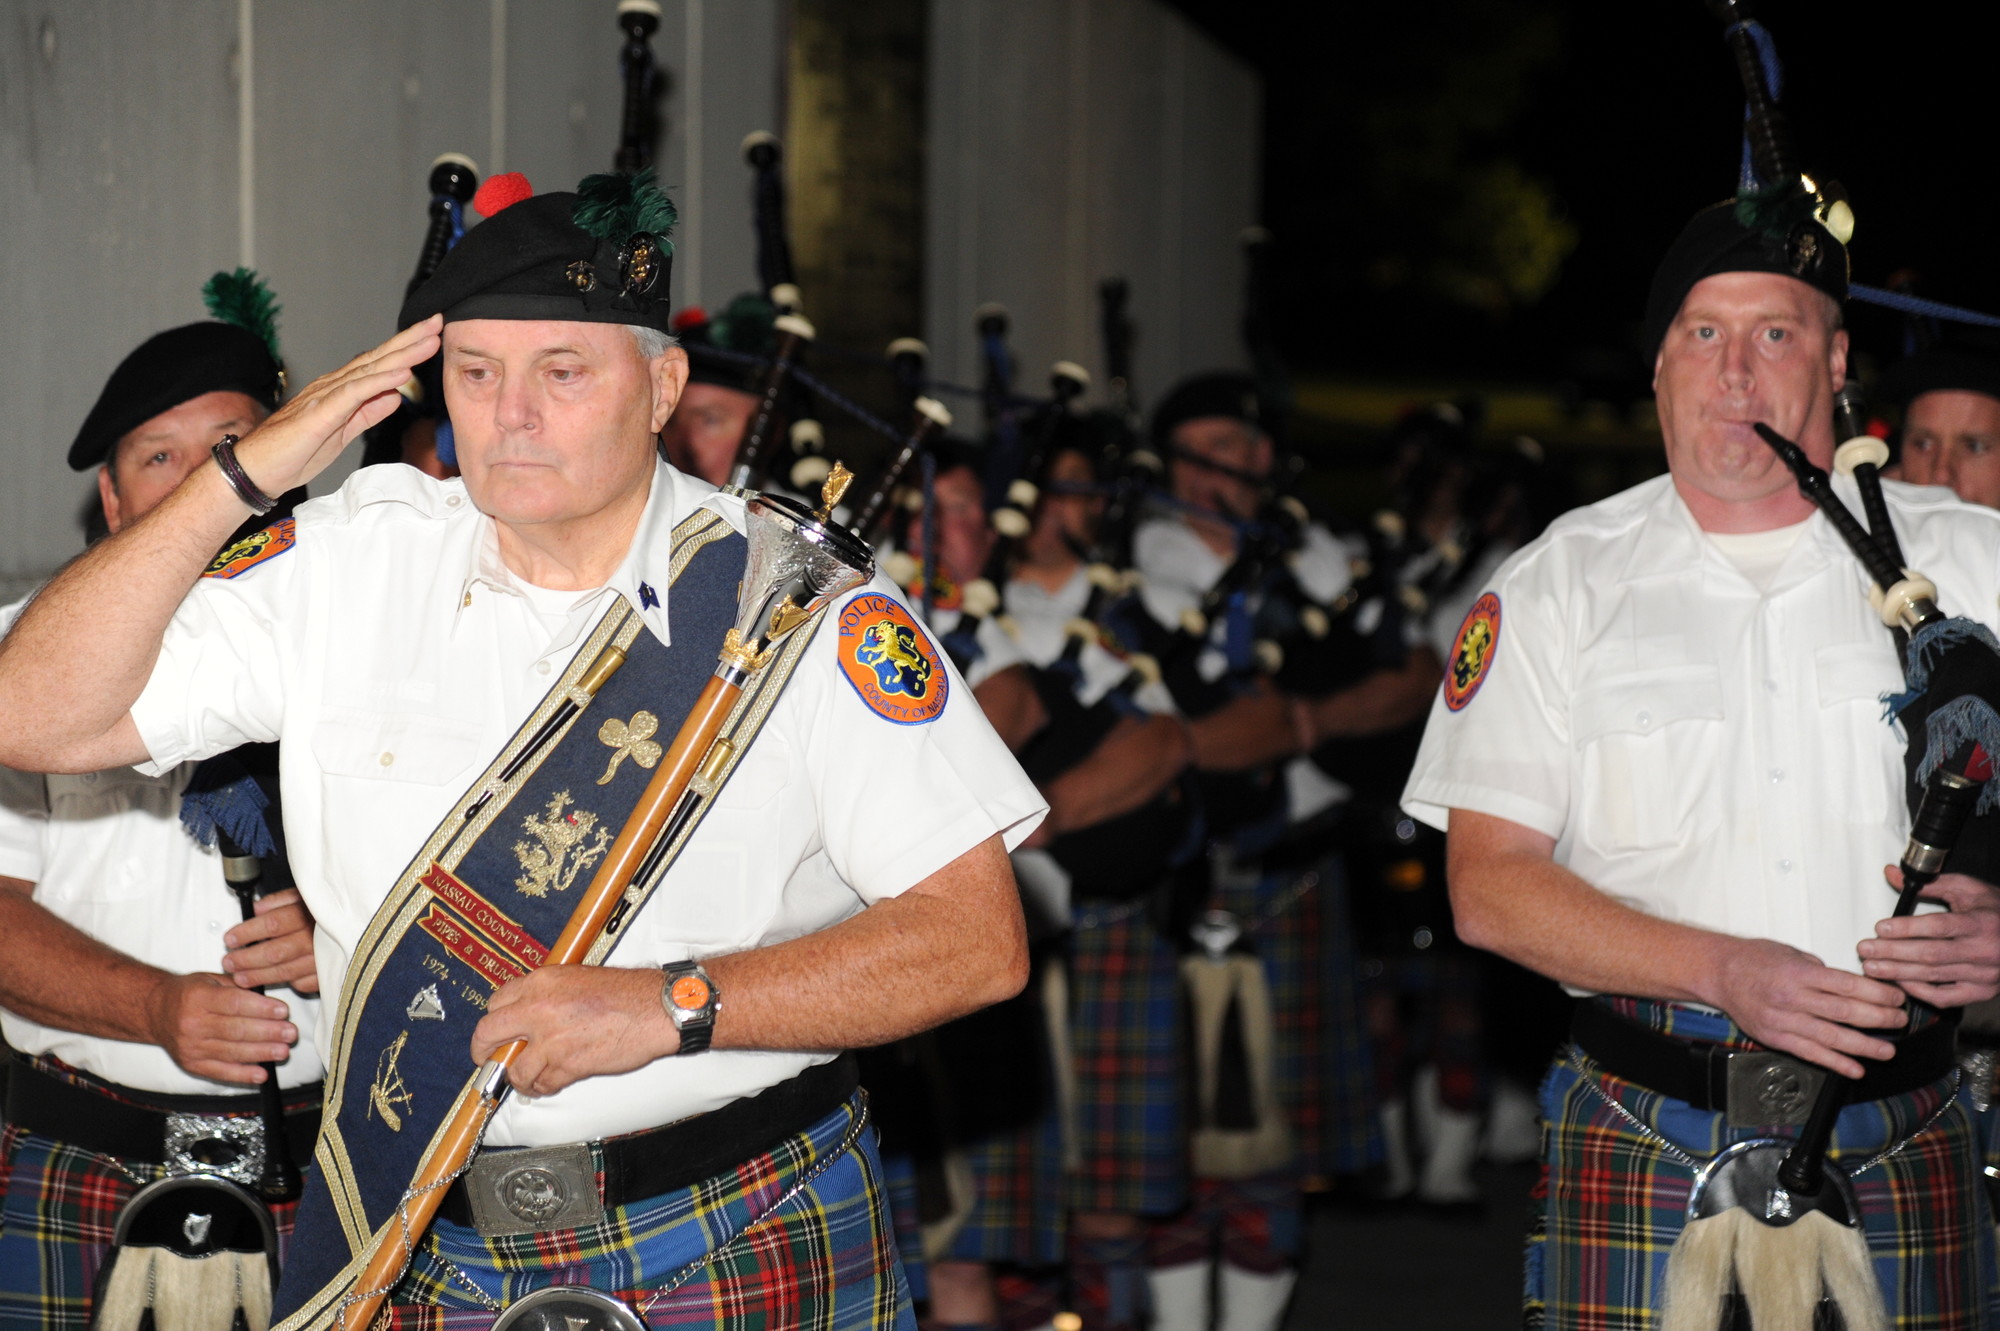 Bagpipers closed the Sept. 8 ceremony with a rendition of “God Bless America.”